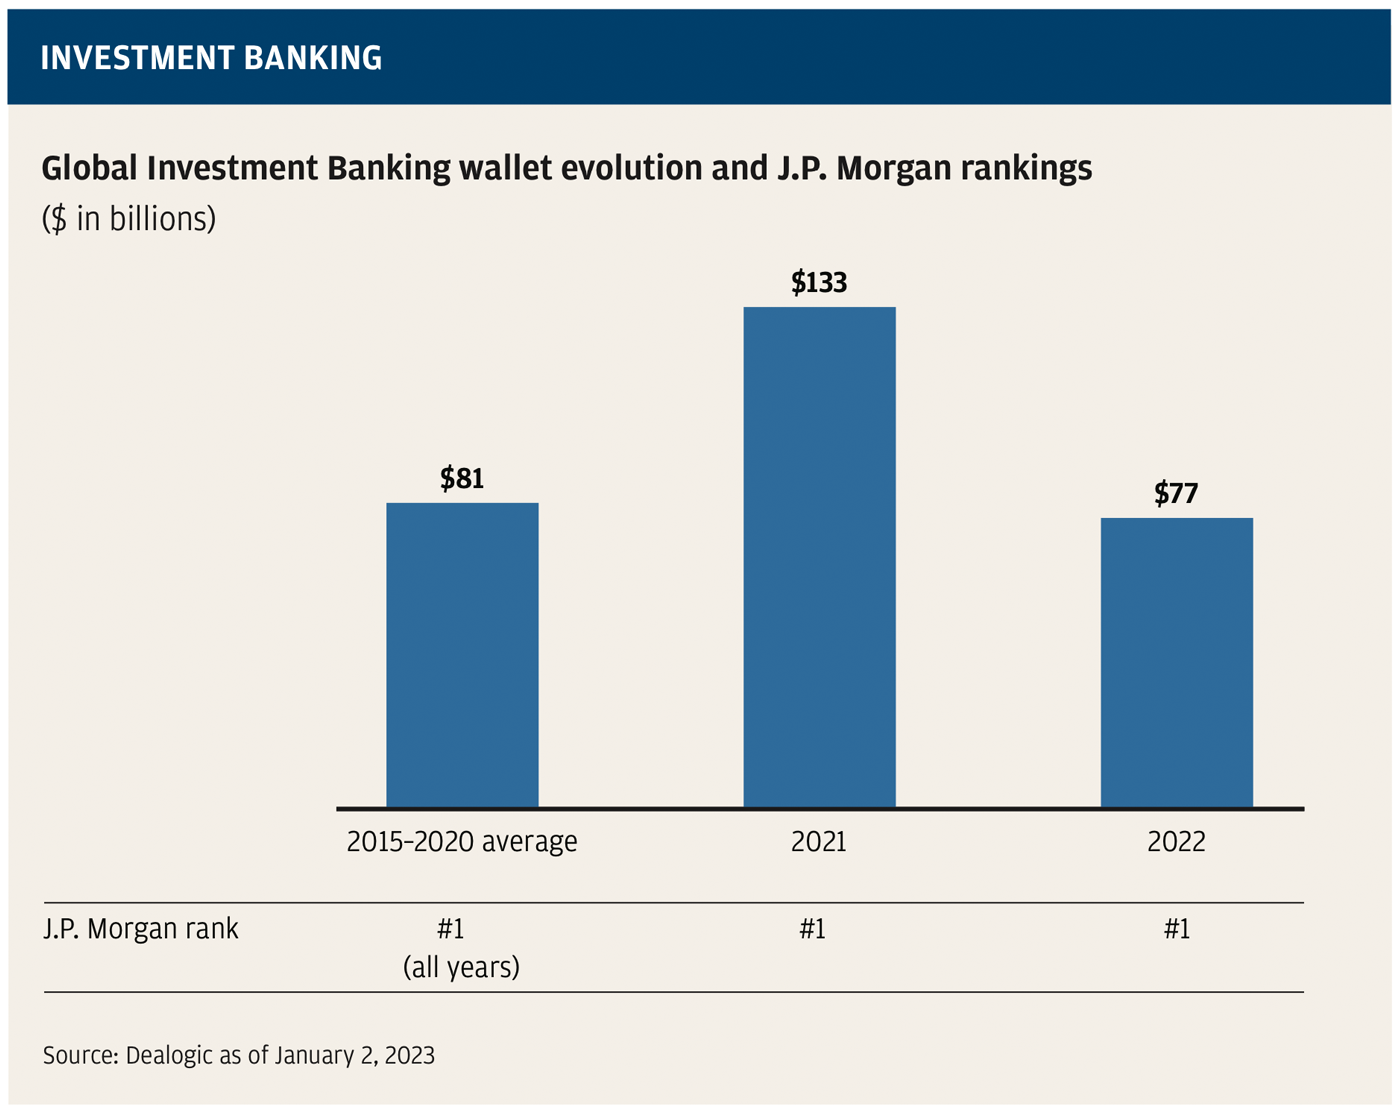 Global Investment Banking wallet evolution and J.P. Morgan rankings